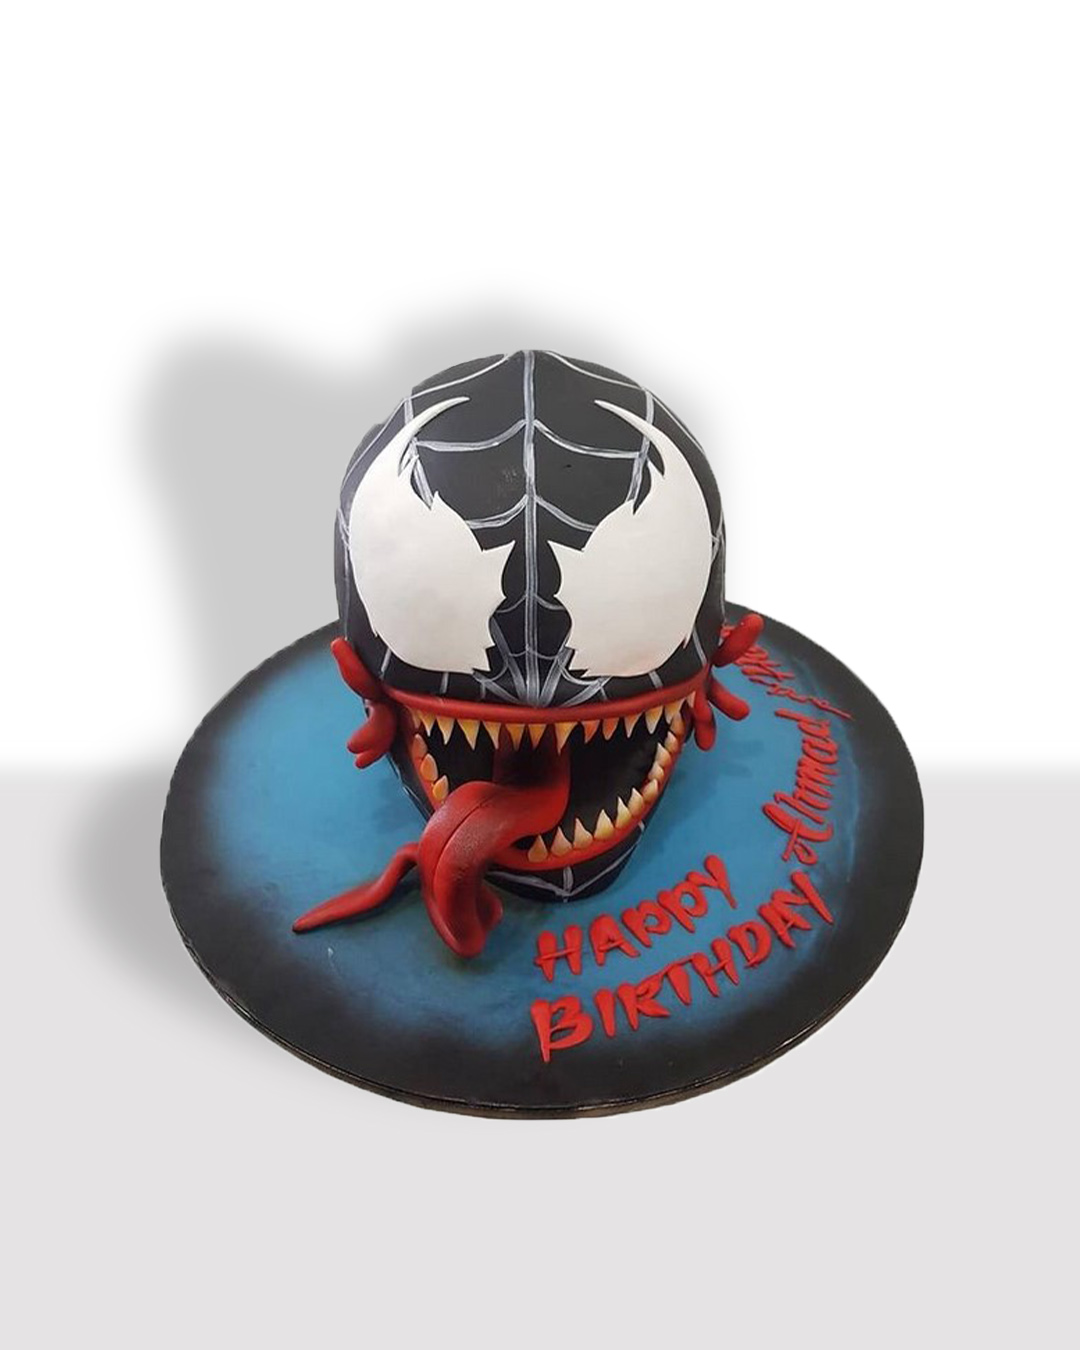 Venom: Let There Be Carnage Edible Cake Topper Image ABPID54687 -  Walmart.com